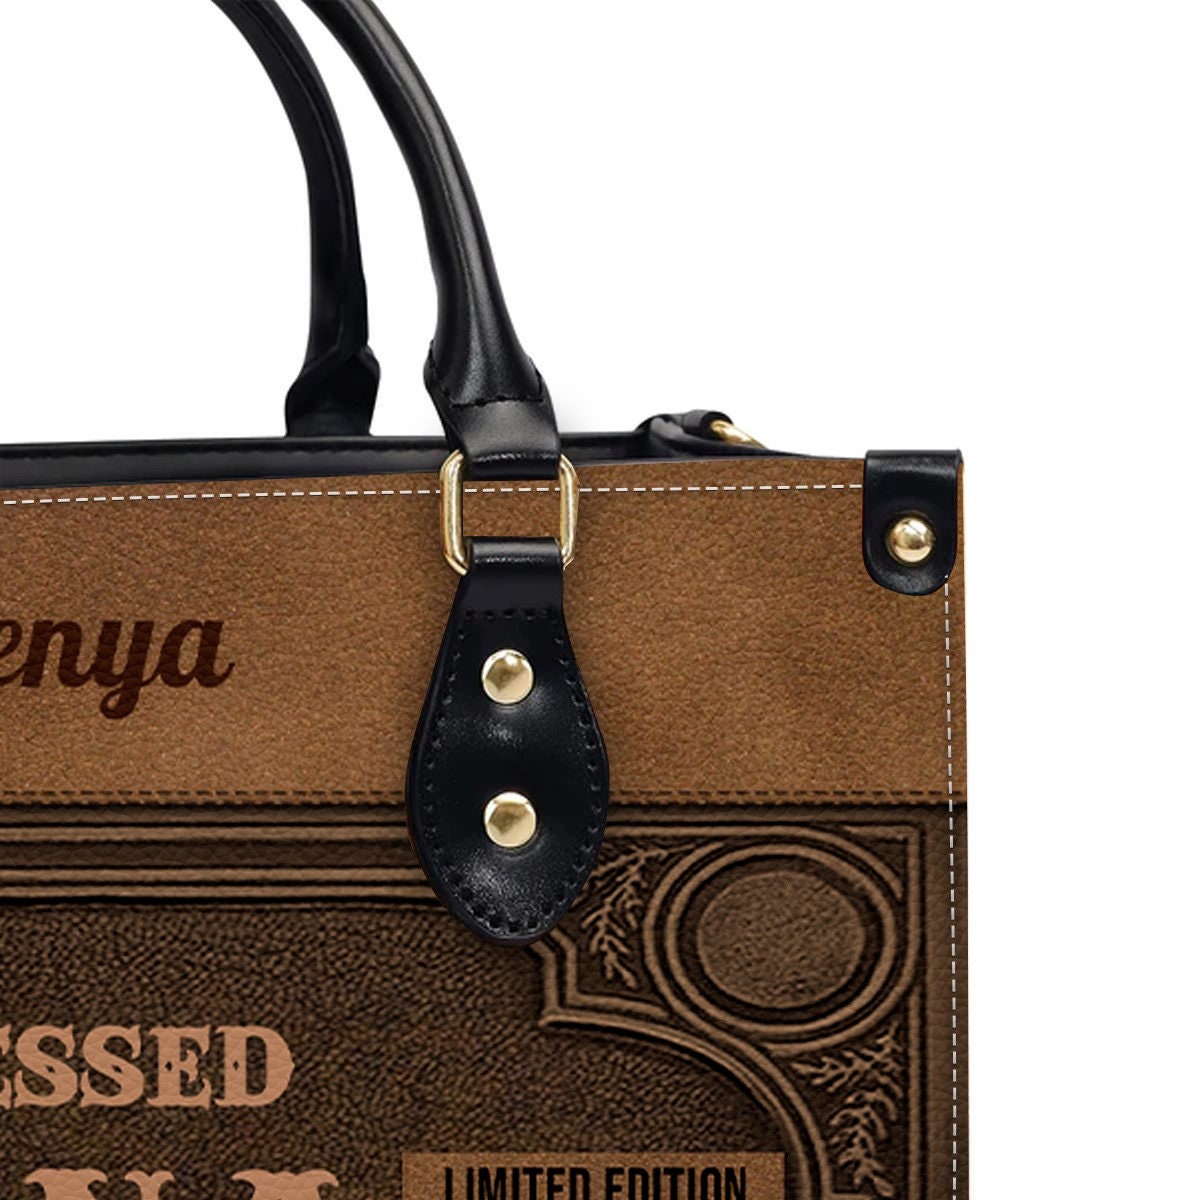 Personalized Leather Handbag - Customizable Blessed Nana Tote